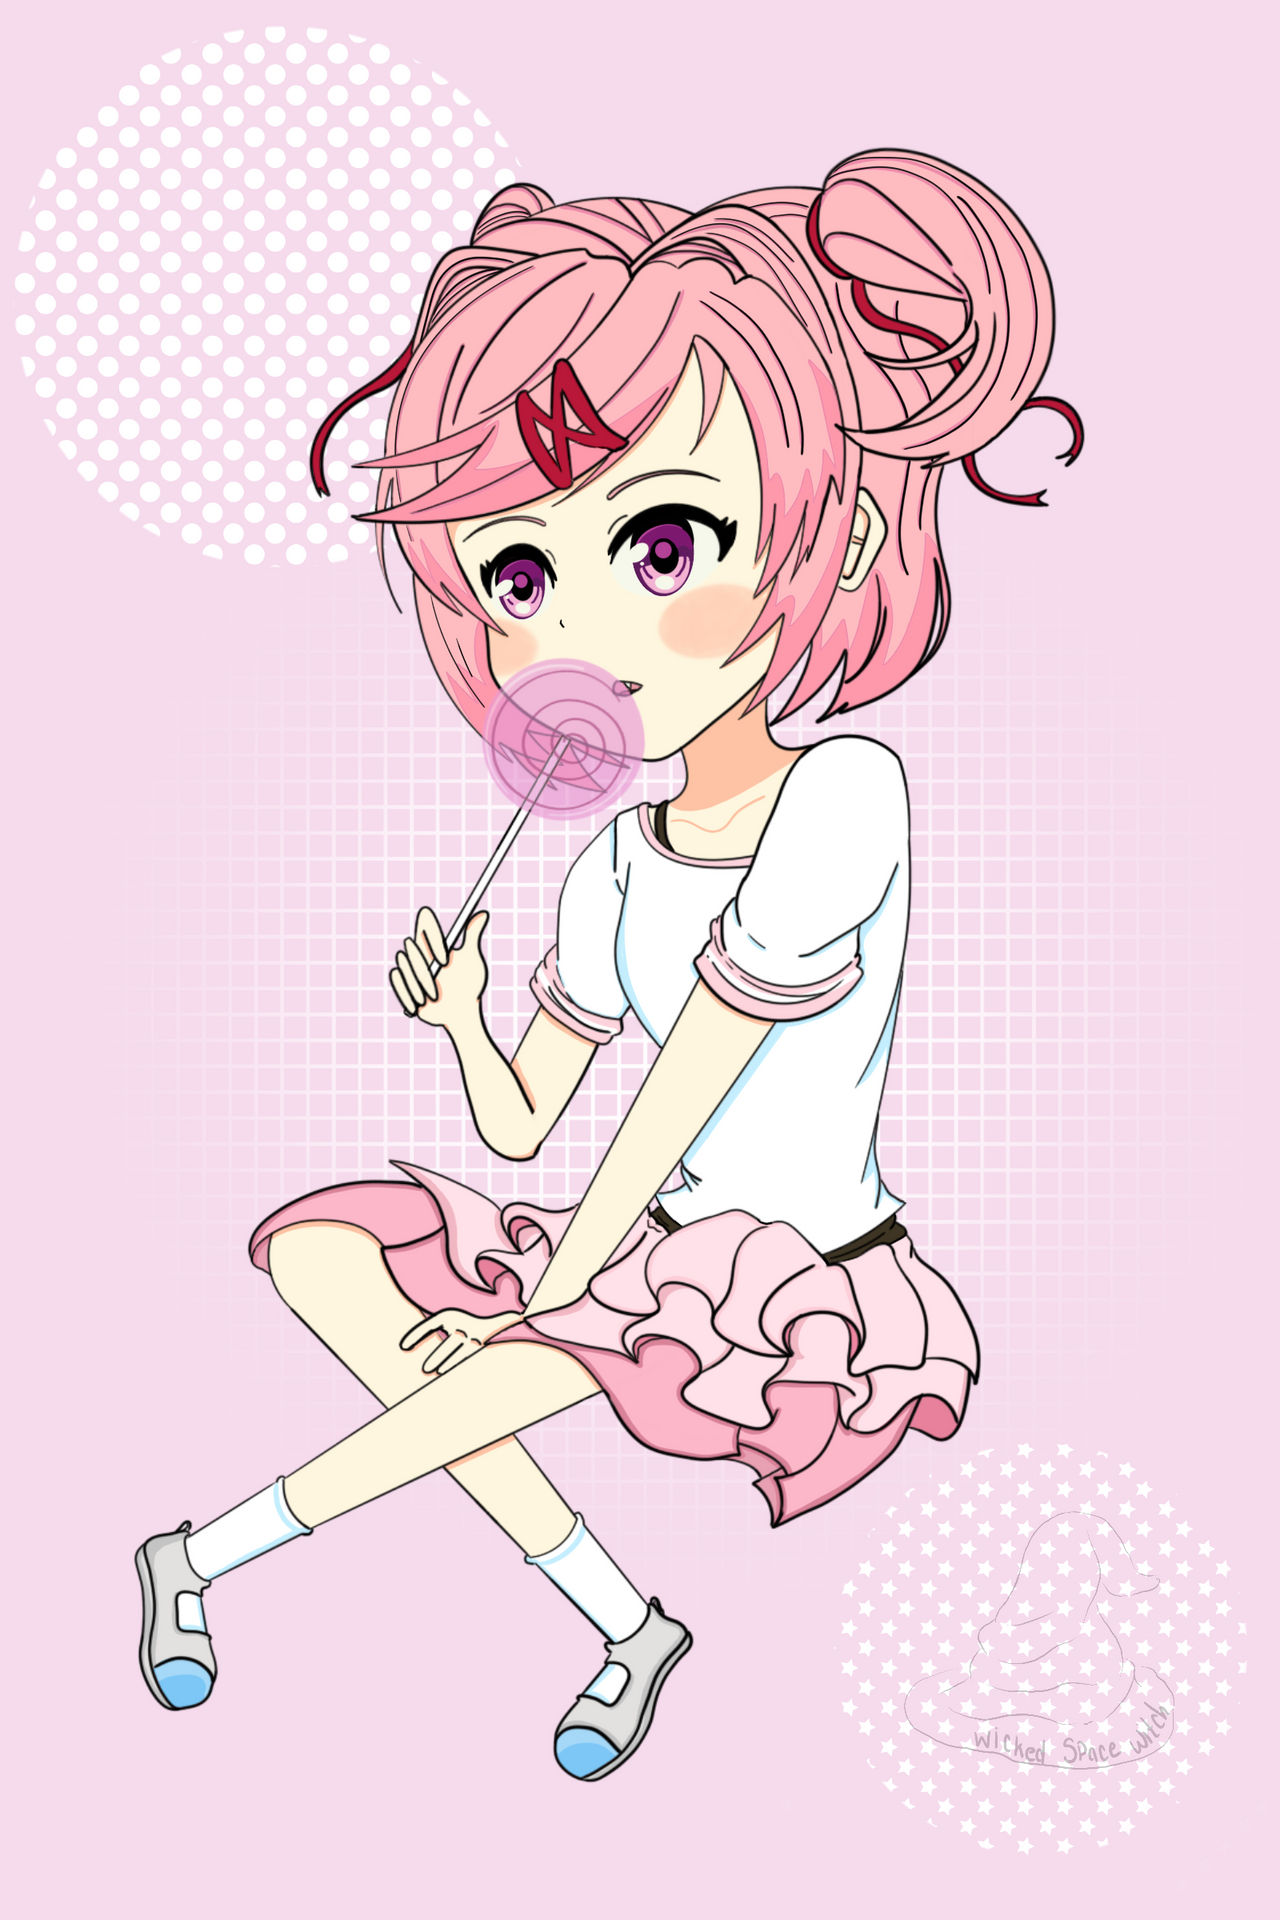 Sweet as candy by Wicked-Space-Witch on DeviantArt